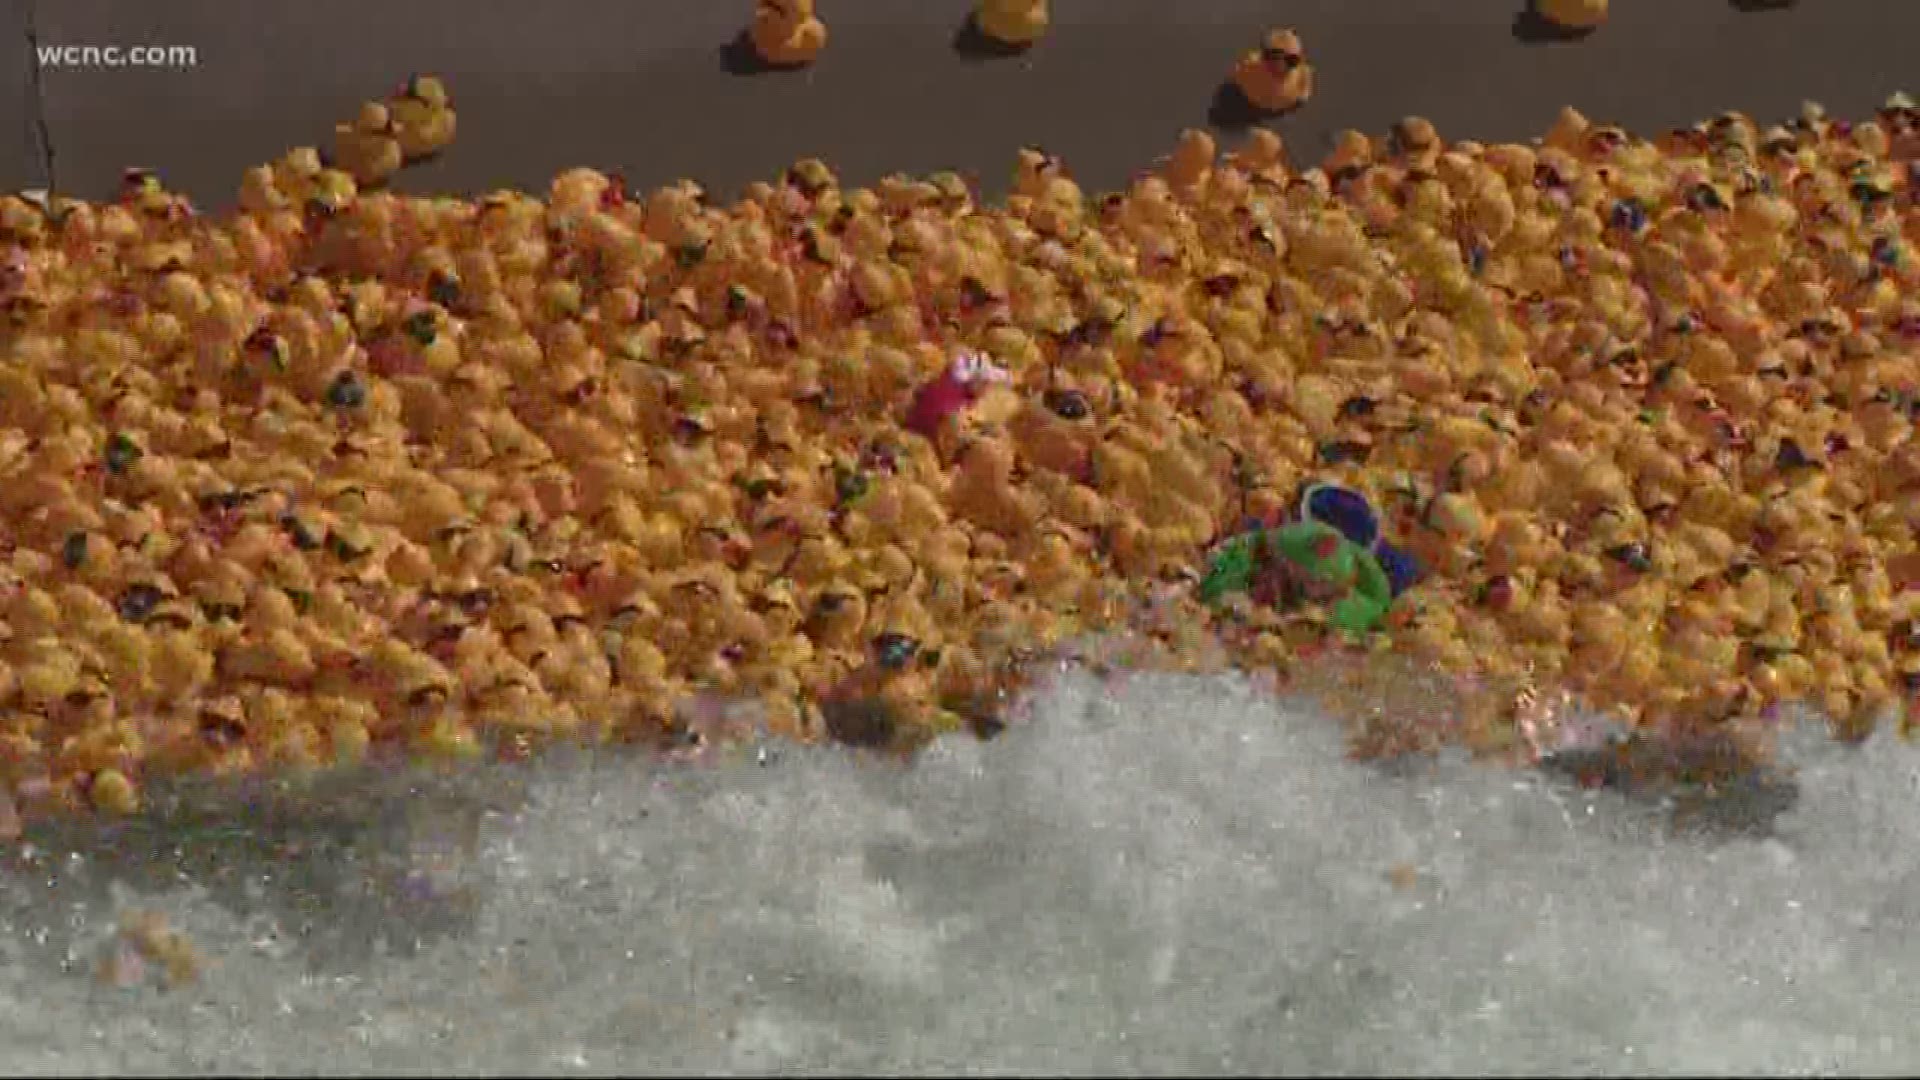 Thousands gathered Sunday afternoon to watch approximately 35,000 rubber ducks race along the main channel at the U.S. National Whitewater Center.